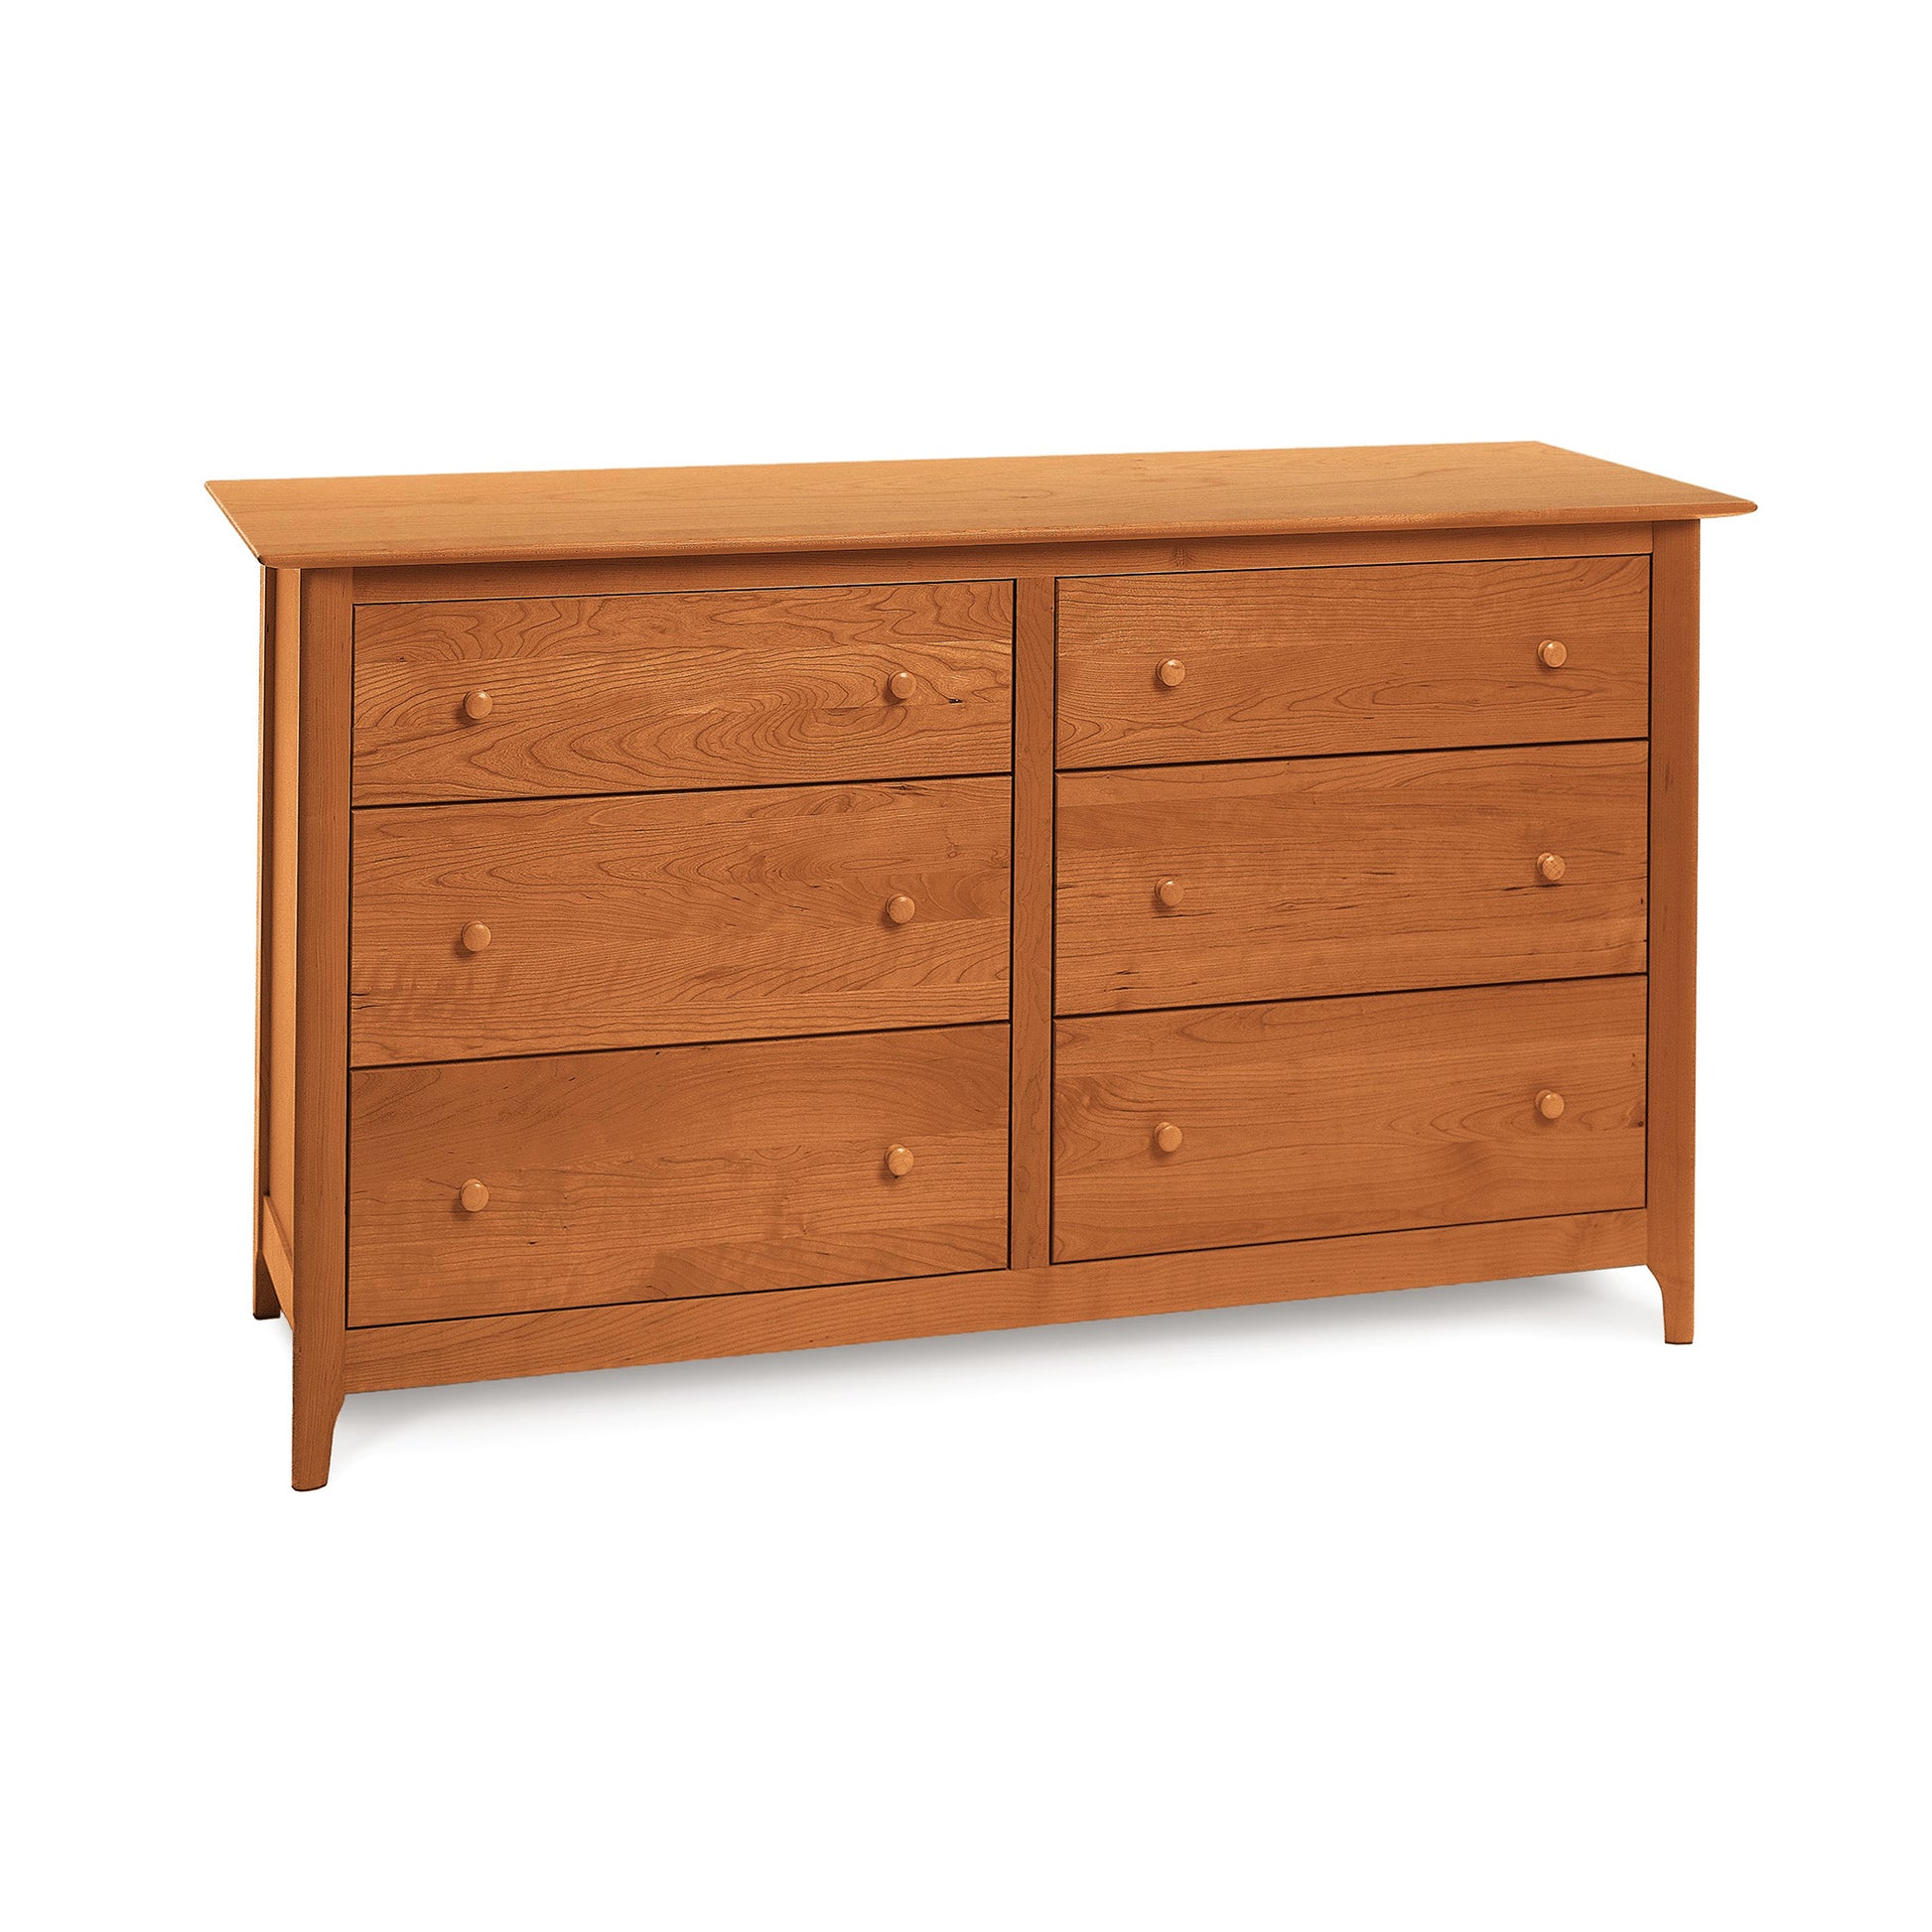 A Copeland Furniture Sarah 6-Drawer Dresser crafted from natural cherry wood with a simple design and round knobs on a white background.